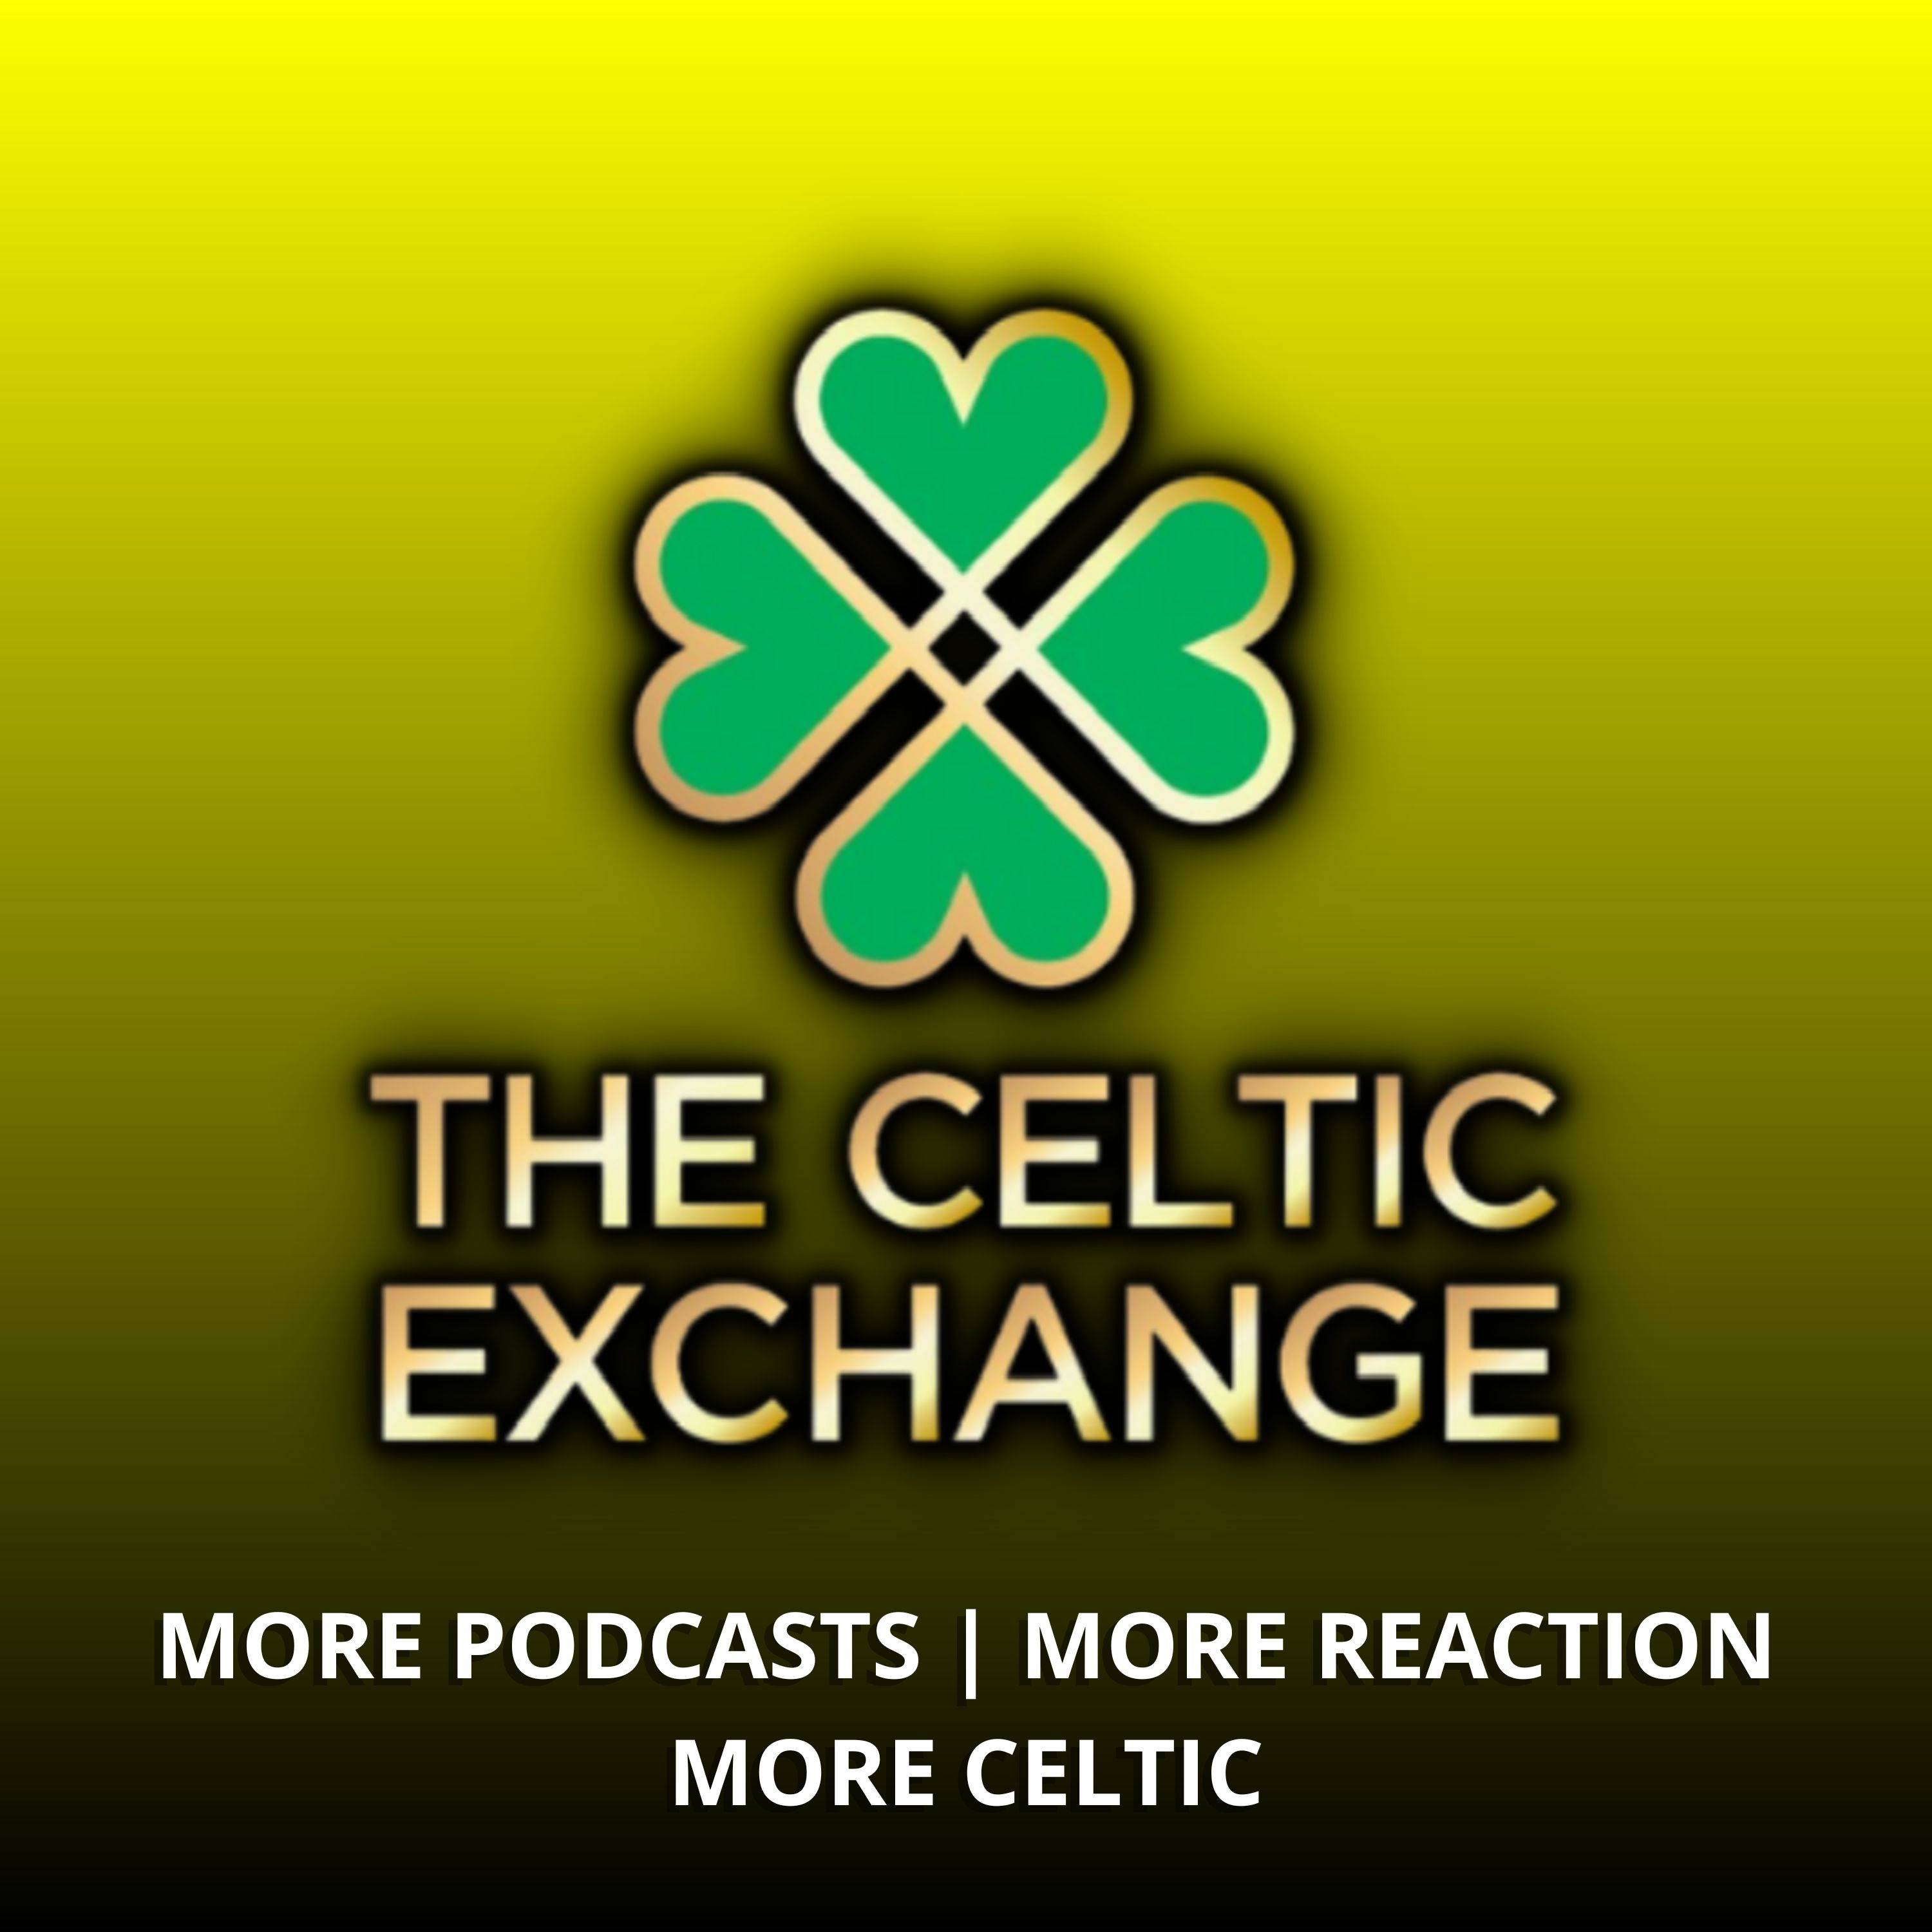 Final Whistle: Talk Is Cheap | Celtic Step Up When It Matters Most With Dominant Derby Win